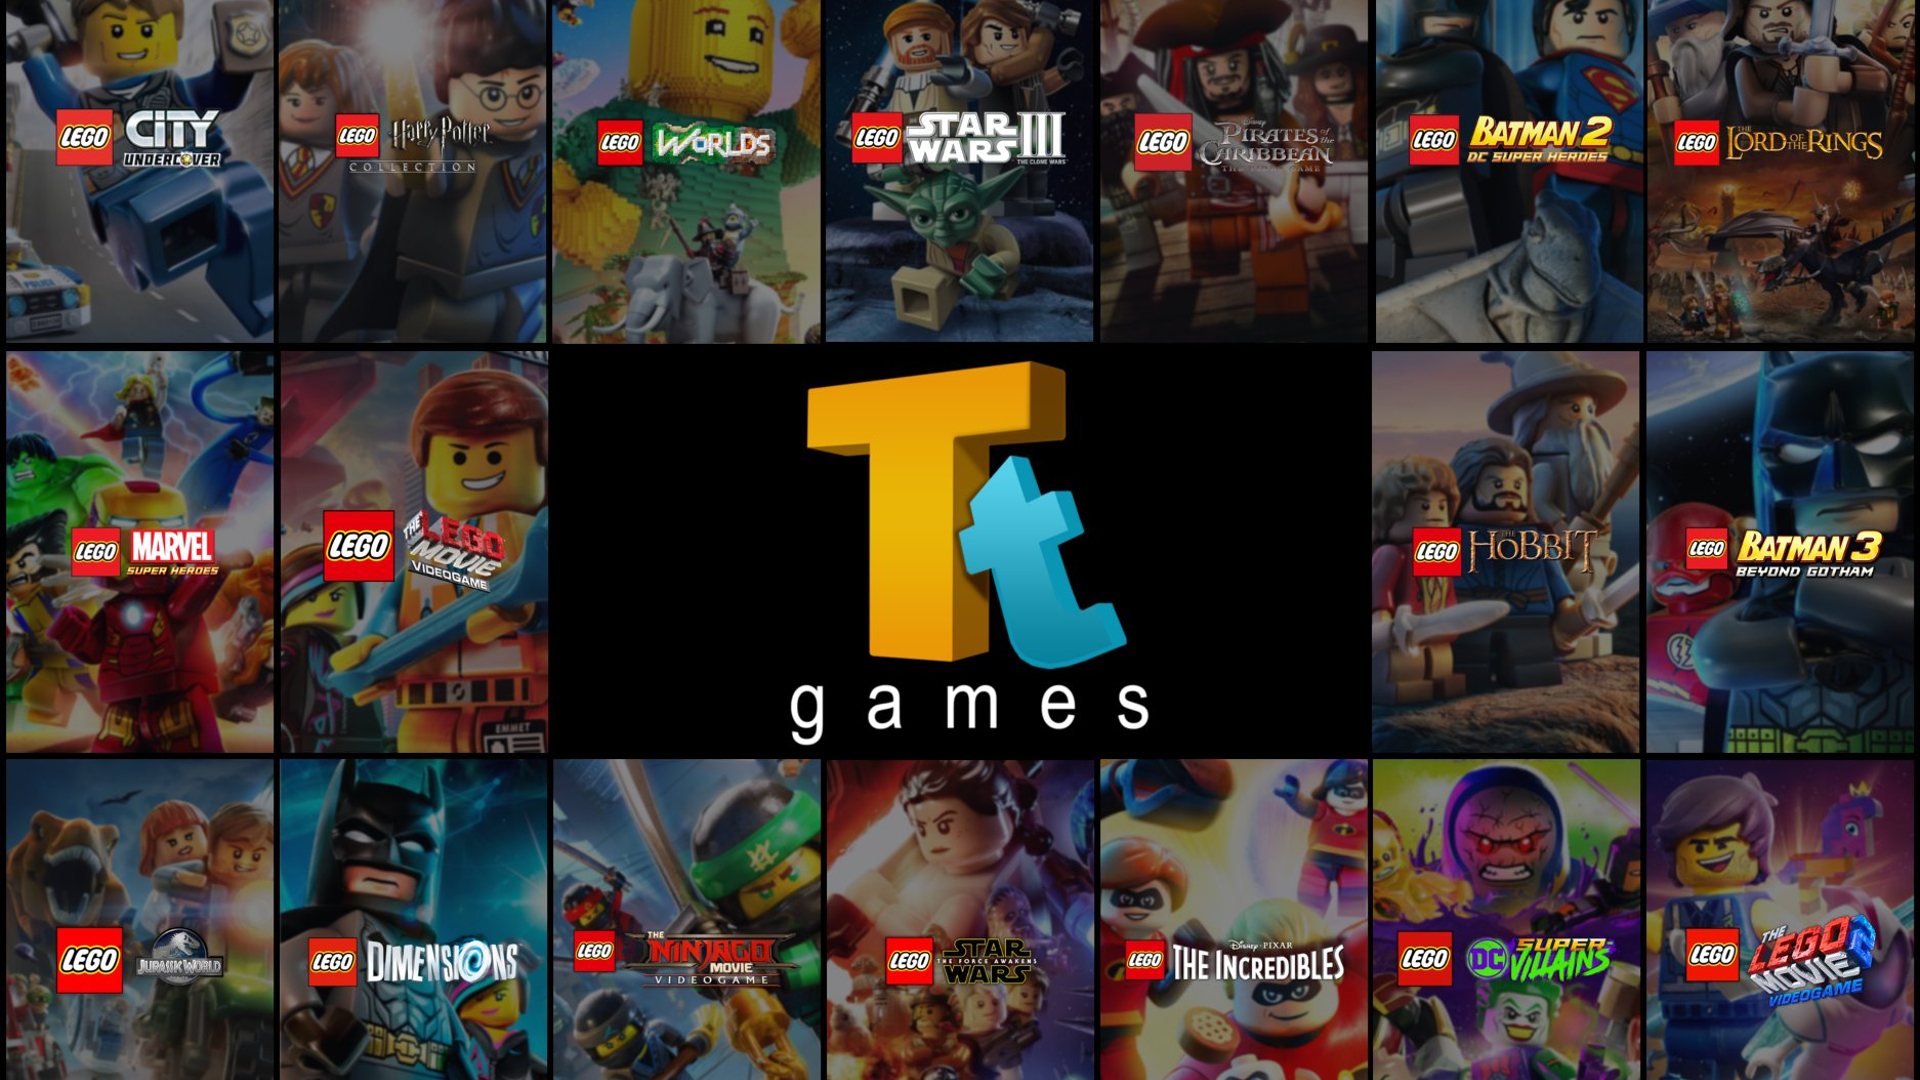 Nearly 20 Years Of TT Awesomeness My Top 5 LEGO Games